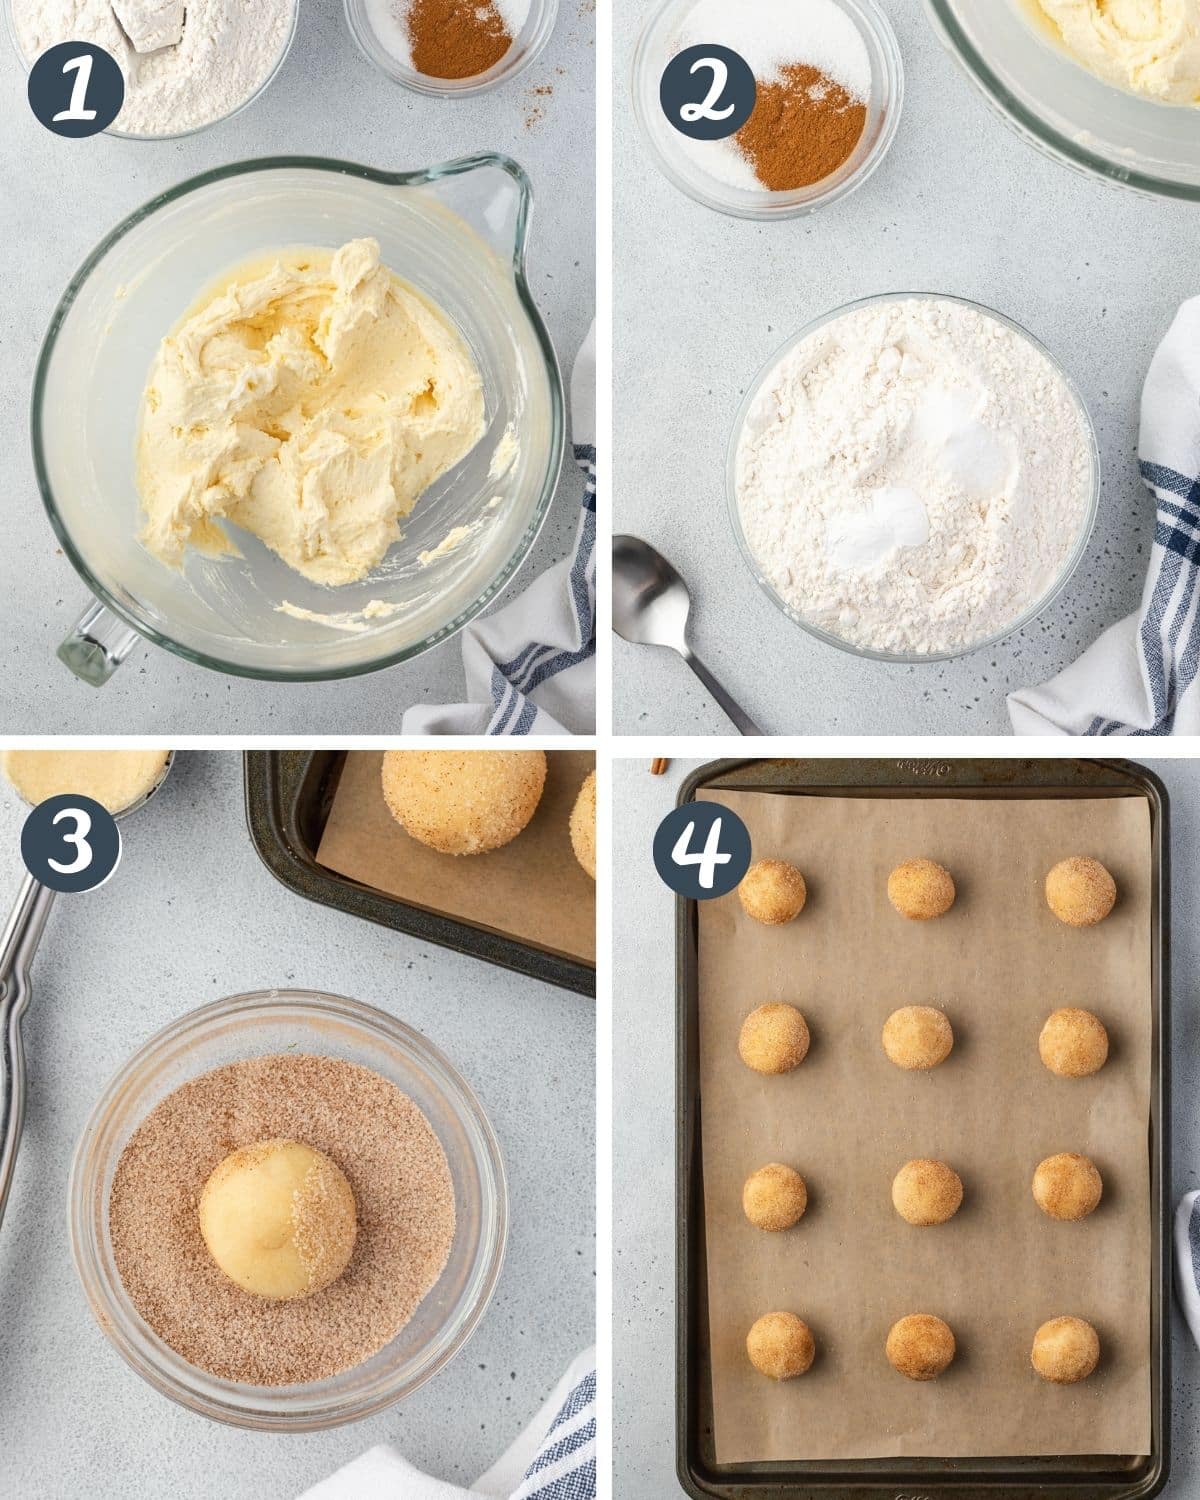 4 steps to make snickerdoodle cookies without cream of tartar. Creaming butter, dry ingredients, rolled in cinnamon, and on cookie sheet.